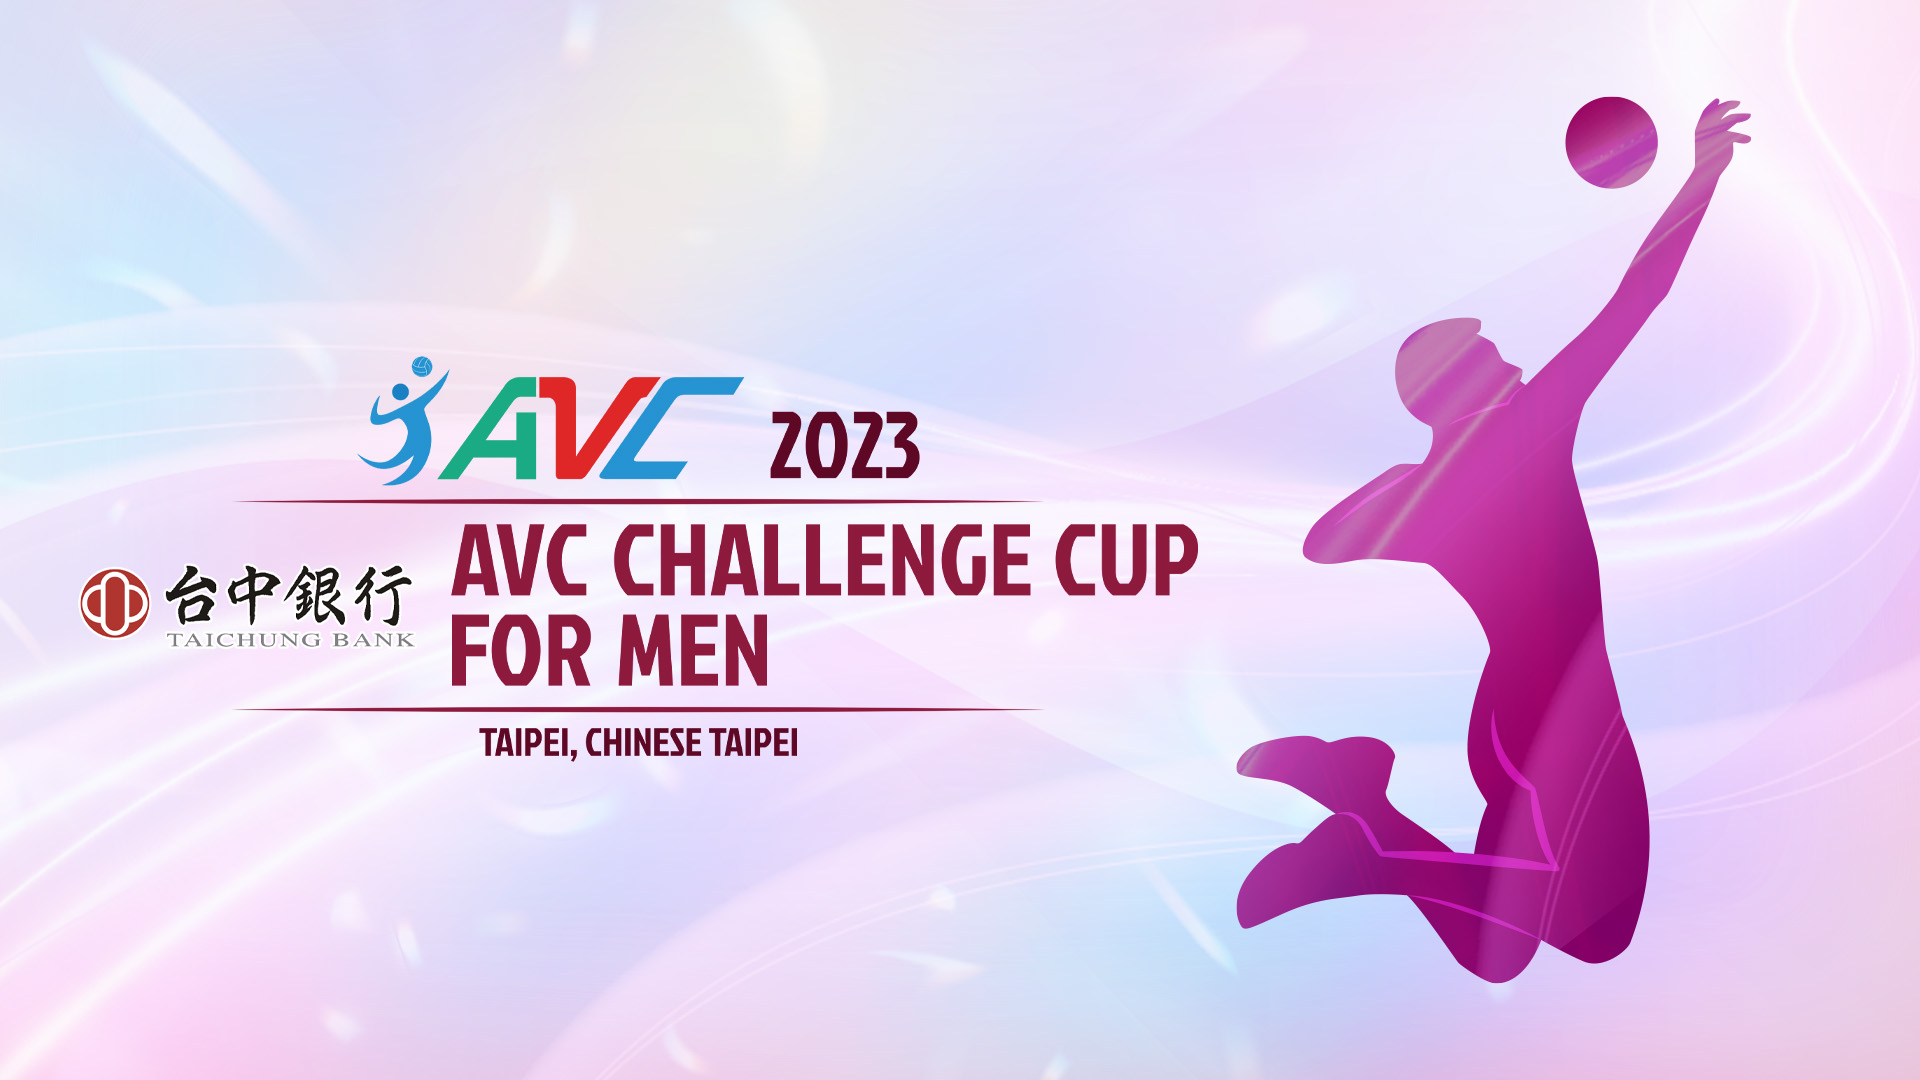 2023 AVC CHALLENGE CUP FOR MEN Asian Volleyball Confederation